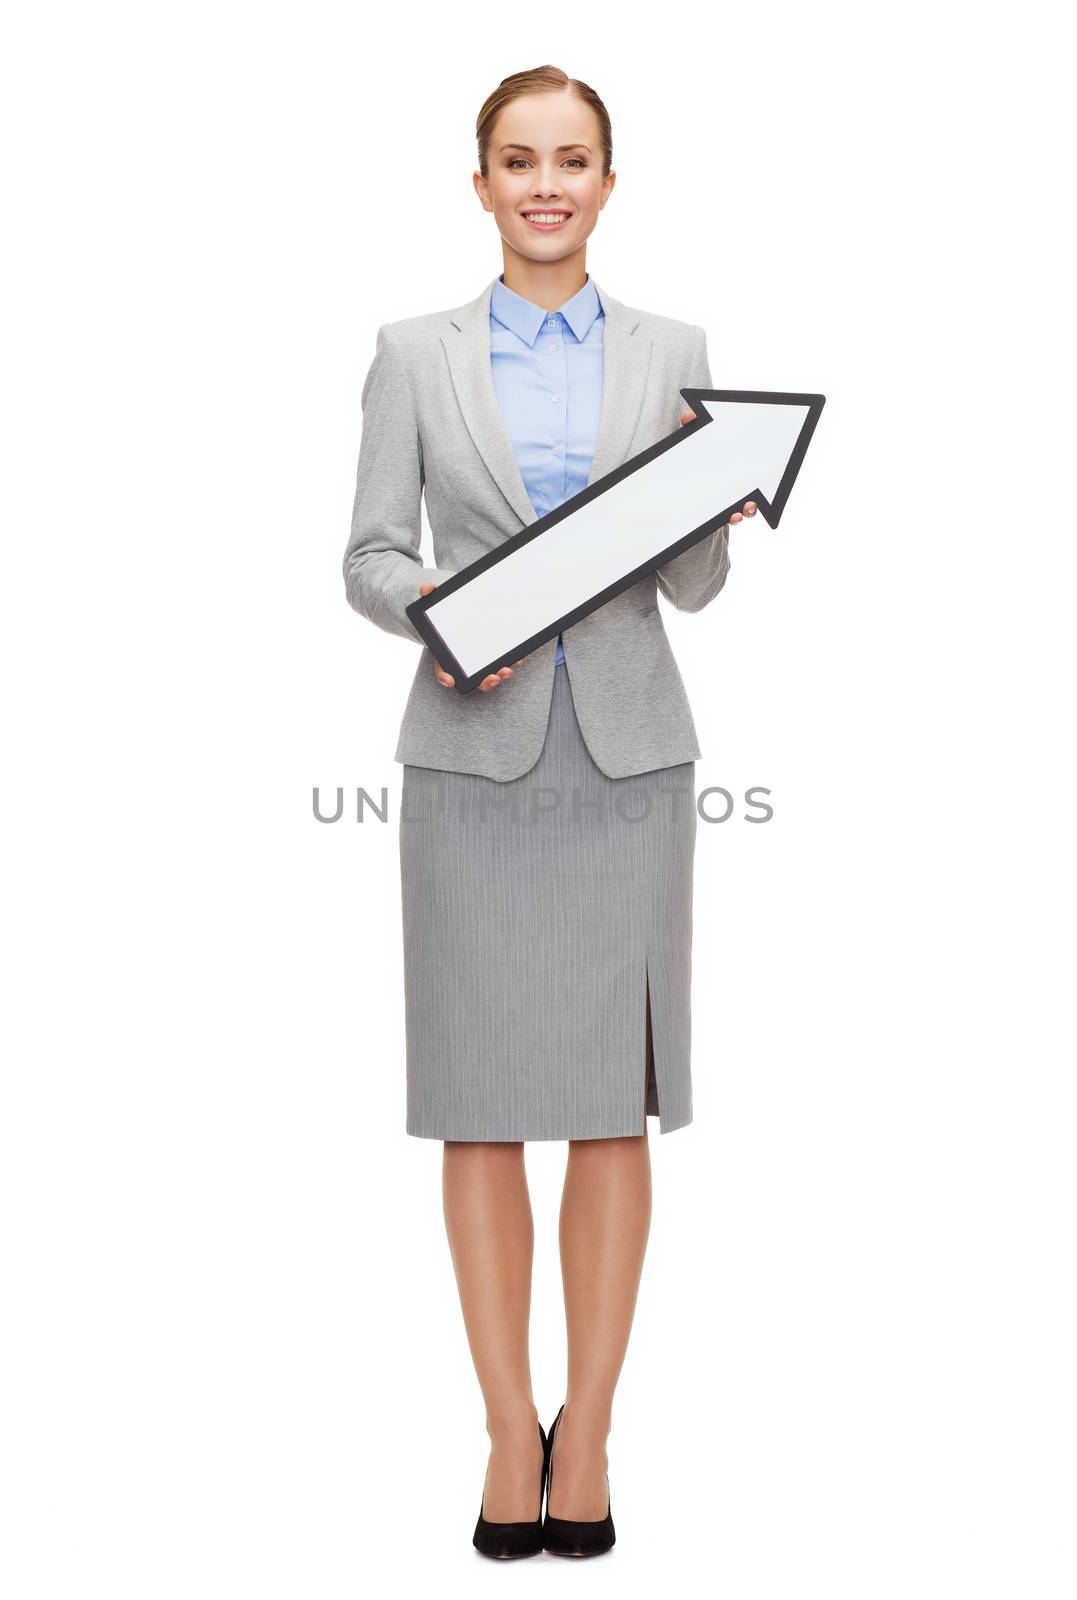 business and education concept - smiling businesswoman with direction arrow sign